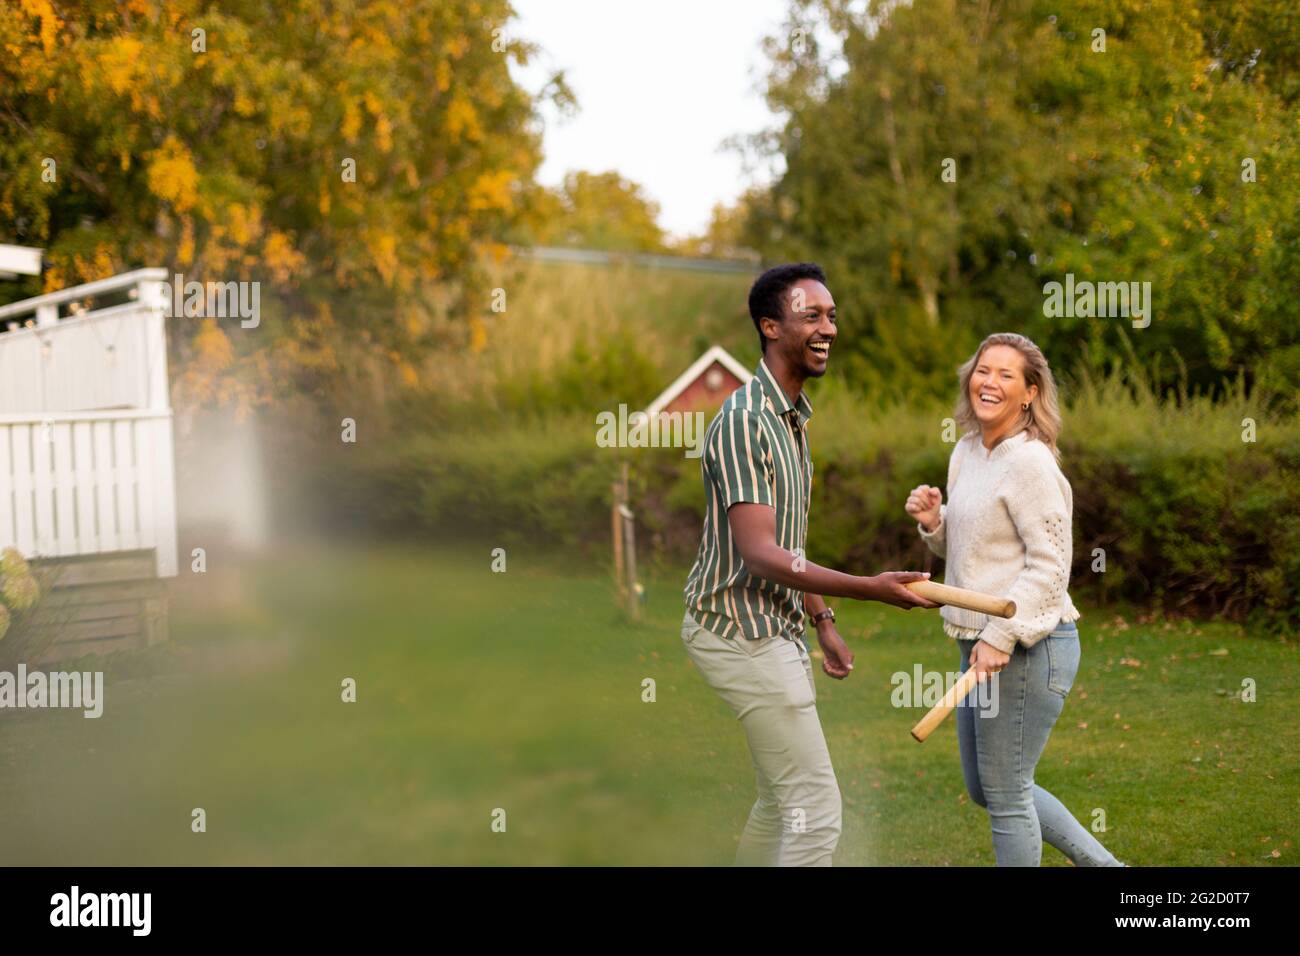 Man and woman playing molkky game in park Stock Photo